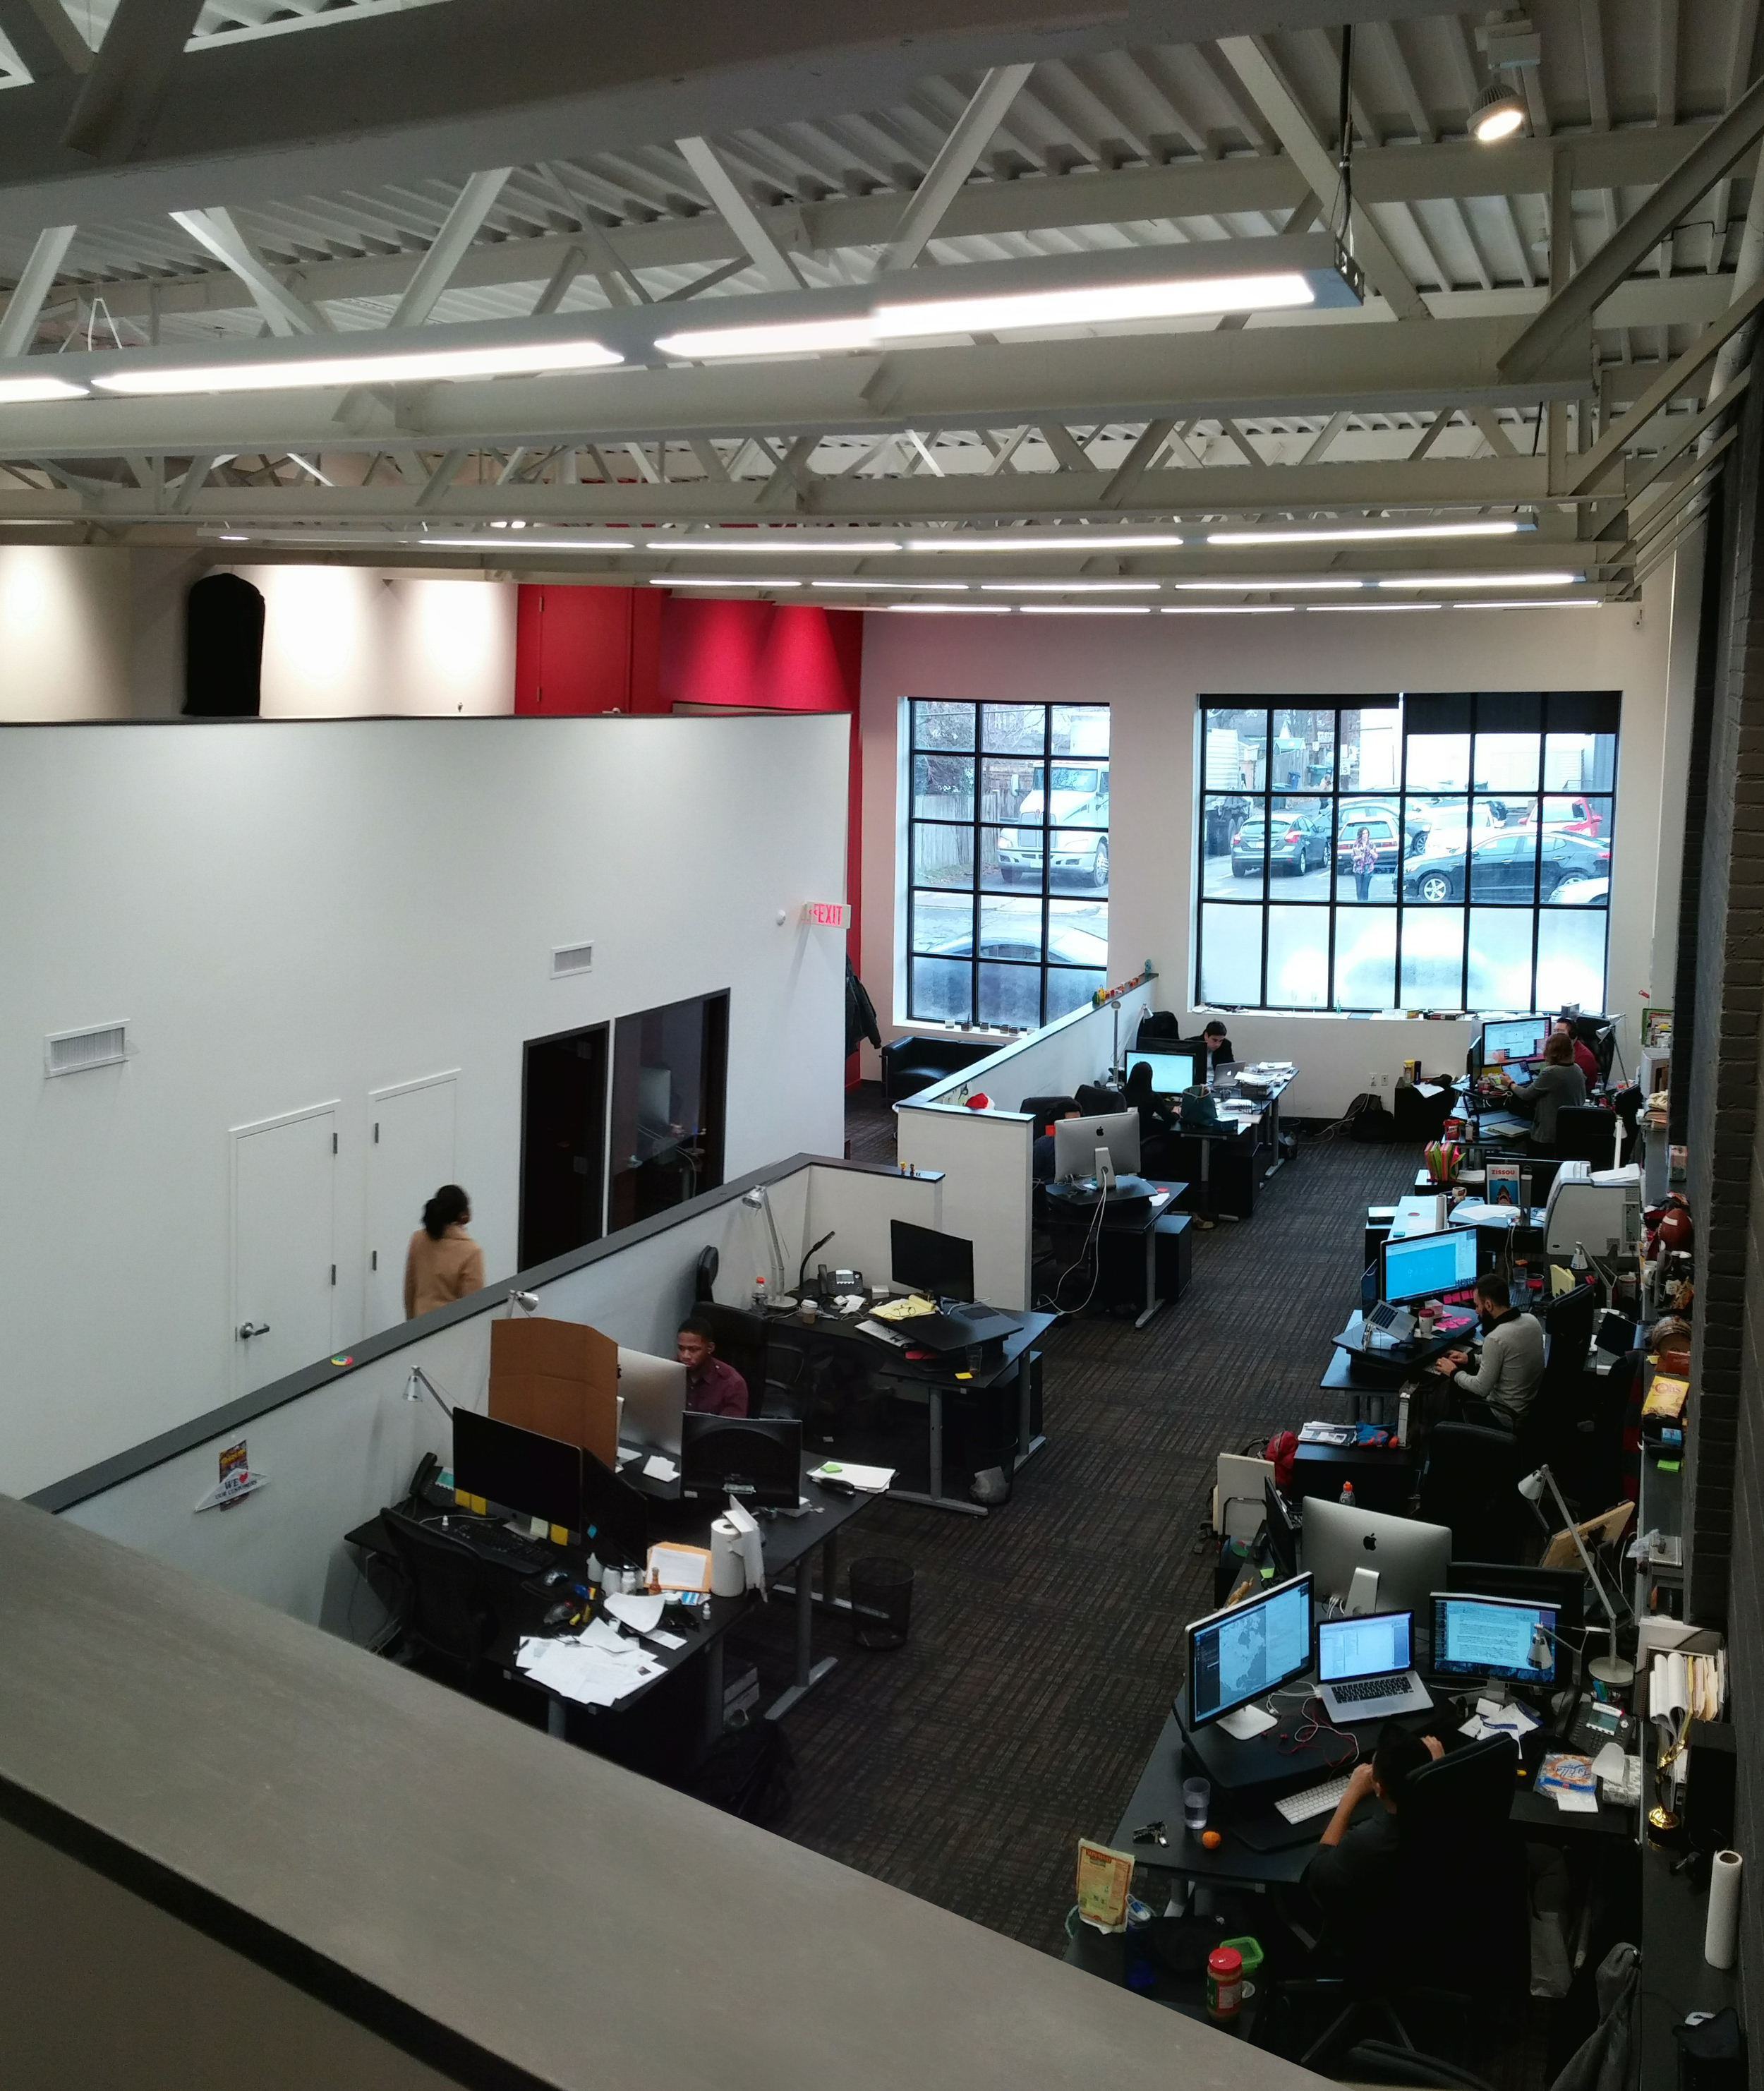 View of entry and workspace from mezzanine